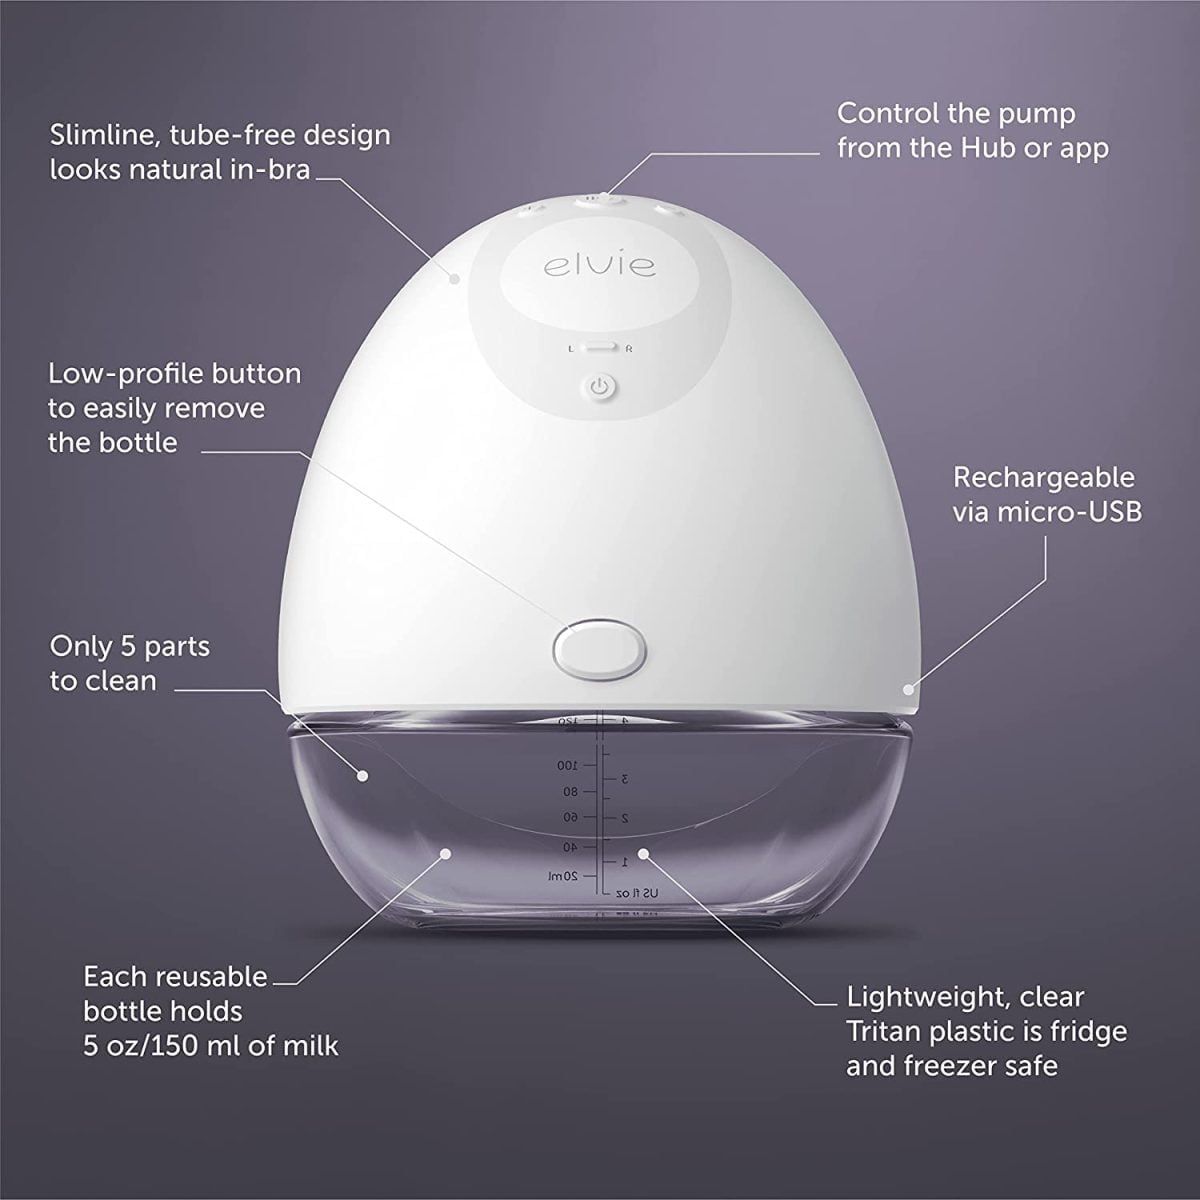 71Knxtt4Snl. Ac Sl1500 Elvie &Lt;H1&Gt;Elvie Wearable Breast Pump Electrical - Double&Lt;/H1&Gt;&Lt;Div Class=&Quot;Wpview Wpview-Wrap&Quot; Data-Wpview-Text=&Quot;Https%3A%2F%2Fwww.youtube.com%2Fwatch%3Fv%3D79Ot7P4Qhps&Quot; Data-Wpview-Type=&Quot;Embedurl&Quot; Contenteditable=&Quot;False&Quot;&Gt;&Lt;Iframe Title=&Quot;Elvie Pump Product Video Dutch&Quot; Width=&Quot;1570&Quot; Height=&Quot;883&Quot; Src=&Quot;Https://Www.youtube.com/Embed/79Ot7P4Qhps?Feature=Oembed&Quot; Frameborder=&Quot;0&Quot; Allow=&Quot;Accelerometer; Autoplay; Clipboard-Write; Encrypted-Media; Gyroscope; Picture-In-Picture&Quot; Allowfullscreen=&Quot;&Quot;&Gt;&Lt;/Iframe&Gt;&Lt;Span Class=&Quot;Mce-Shim&Quot;&Gt;&Lt;/Span&Gt;&Lt;Span Class=&Quot;Wpview-End&Quot;&Gt;&Lt;/Span&Gt;&Lt;/Div&Gt;&Lt;Ul Class=&Quot;A-Unordered-List A-Vertical A-Spacing-Mini&Quot; Style=&Quot;Box-Sizing: Border-Box; Margin: 0Px 0Px 0Px 18Px; Color: #0F1111; Padding: 0Px; Font-Family: 'Amazon Ember', Arial, Sans-Serif; Font-Size: 14Px;&Quot; Data-Mce-Style=&Quot;Box-Sizing: Border-Box; Margin: 0Px 0Px 0Px 18Px; Color: #0F1111; Padding: 0Px; Font-Family: 'Amazon Ember', Arial, Sans-Serif; Font-Size: 14Px;&Quot;&Gt;&Lt;Li Style=&Quot;Box-Sizing: Border-Box; List-Style: Disc; Overflow-Wrap: Break-Word; Margin: 0Px;&Quot; Data-Mce-Style=&Quot;Box-Sizing: Border-Box; List-Style: Disc; Overflow-Wrap: Break-Word; Margin: 0Px;&Quot;&Gt;&Lt;Span Class=&Quot;A-List-Item&Quot; Style=&Quot;Box-Sizing: Border-Box;&Quot; Data-Mce-Style=&Quot;Box-Sizing: Border-Box;&Quot;&Gt;Wearable: Breast Pump For Hands Free Pumping: Elvie Pump Is The Smallest And Lightest All-In-One Wearable Electric Breast Pump. Tucking Discreetly Into Your Bra, It Gives You The Confidence To Pump Anywhere—From Boardroom To Baby’s Room. Elvie Pump Is Designed To Be Worn With Your Standard Nursing Bra.&Lt;/Span&Gt;&Lt;/Li&Gt;&Lt;Li Style=&Quot;Box-Sizing: Border-Box; List-Style: Disc; Overflow-Wrap: Break-Word; Margin: 0Px;&Quot; Data-Mce-Style=&Quot;Box-Sizing: Border-Box; List-Style: Disc; Overflow-Wrap: Break-Word; Margin: 0Px;&Quot;&Gt;&Lt;Span Class=&Quot;A-List-Item&Quot; Style=&Quot;Box-Sizing: Border-Box;&Quot; Data-Mce-Style=&Quot;Box-Sizing: Border-Box;&Quot;&Gt;Electric: This Electric Pump'S Patented Technology Makes It Ultra-Quiet. That Way, You Can Pump In Peace—Baby Permitting, Of Course. No Cords, No Tubes, No Wasted Time – Elvie Pump Has Just Five Parts To Clean. Assembly Is Quick, And Getting Started Is Easy With In-App On-Boarding To Guide You Step-By-Step.&Lt;/Span&Gt;&Lt;/Li&Gt;&Lt;Li Style=&Quot;Box-Sizing: Border-Box; List-Style: Disc; Overflow-Wrap: Break-Word; Margin: 0Px;&Quot; Data-Mce-Style=&Quot;Box-Sizing: Border-Box; List-Style: Disc; Overflow-Wrap: Break-Word; Margin: 0Px;&Quot;&Gt;&Lt;Span Class=&Quot;A-List-Item&Quot; Style=&Quot;Box-Sizing: Border-Box;&Quot; Data-Mce-Style=&Quot;Box-Sizing: Border-Box;&Quot;&Gt;Control: You Can Control Your Pump From Your Phone, Monitor Real-Time Milk Volume, Track Pumping History And Get Custom Pumping Insights – All Without Ever Reaching Into Your Bra, Thanks To The App. Plus, Personalize Your Pump By Choosing Default Intensity Settings And Dim The Lights On The Hub. Elvie Pump Automatically Switches From Stimulation Into Expression Modes When It Detects Let-Down And Will Pause When The Bottle Is Full. One Less Thing To Think About.&Lt;/Span&Gt;&Lt;/Li&Gt;&Lt;Li Style=&Quot;Box-Sizing: Border-Box; List-Style: Disc; Overflow-Wrap: Break-Word; Margin: 0Px;&Quot; Data-Mce-Style=&Quot;Box-Sizing: Border-Box; List-Style: Disc; Overflow-Wrap: Break-Word; Margin: 0Px;&Quot;&Gt;&Lt;Span Class=&Quot;A-List-Item&Quot; Style=&Quot;Box-Sizing: Border-Box;&Quot; Data-Mce-Style=&Quot;Box-Sizing: Border-Box;&Quot;&Gt;Bottles: Each Bottle Holds 5 Oz/150 Ml Of Milk, As Well As Being Fridge And Freezer Safe. Use On Either Breast For Single Or Double Pumping. Just Assign Each Pump A Side To Accurately Track In The App.&Lt;/Span&Gt;&Lt;/Li&Gt;&Lt;/Ul&Gt;&Lt;P&Gt;&Lt;Span Class=&Quot;A-Size-Large Product-Title-Word-Break&Quot; Style=&Quot;Box-Sizing: Border-Box; Text-Rendering: Optimizelegibility; Word-Break: Break-Word; Line-Height: 32Px !Important;&Quot; Data-Mce-Style=&Quot;Box-Sizing: Border-Box; Text-Rendering: Optimizelegibility; Word-Break: Break-Word; Line-Height: 32Px !Important;&Quot;&Gt;&Nbsp;&Lt;/Span&Gt;&Lt;B&Gt;We Also Provide International Wholesale And Retail Shipping To All Gcc Countries: Saudi Arabia, Qatar, Oman, Kuwait, Bahrain.&Lt;/B&Gt;&Lt;Span Style=&Quot;Color: #0F1111; Font-Family: Amazon Ember, Arial, Sans-Serif;&Quot; Data-Mce-Style=&Quot;Color: #0F1111; Font-Family: Amazon Ember, Arial, Sans-Serif;&Quot;&Gt;&Lt;Span Style=&Quot;Font-Size: 14Px;&Quot; Data-Mce-Style=&Quot;Font-Size: 14Px;&Quot;&Gt;&Lt;Br&Gt;&Lt;/Span&Gt;&Lt;/Span&Gt;&Lt;/P&Gt; Breast Pump Elvie Wearable Breast Pump Electrical - Double